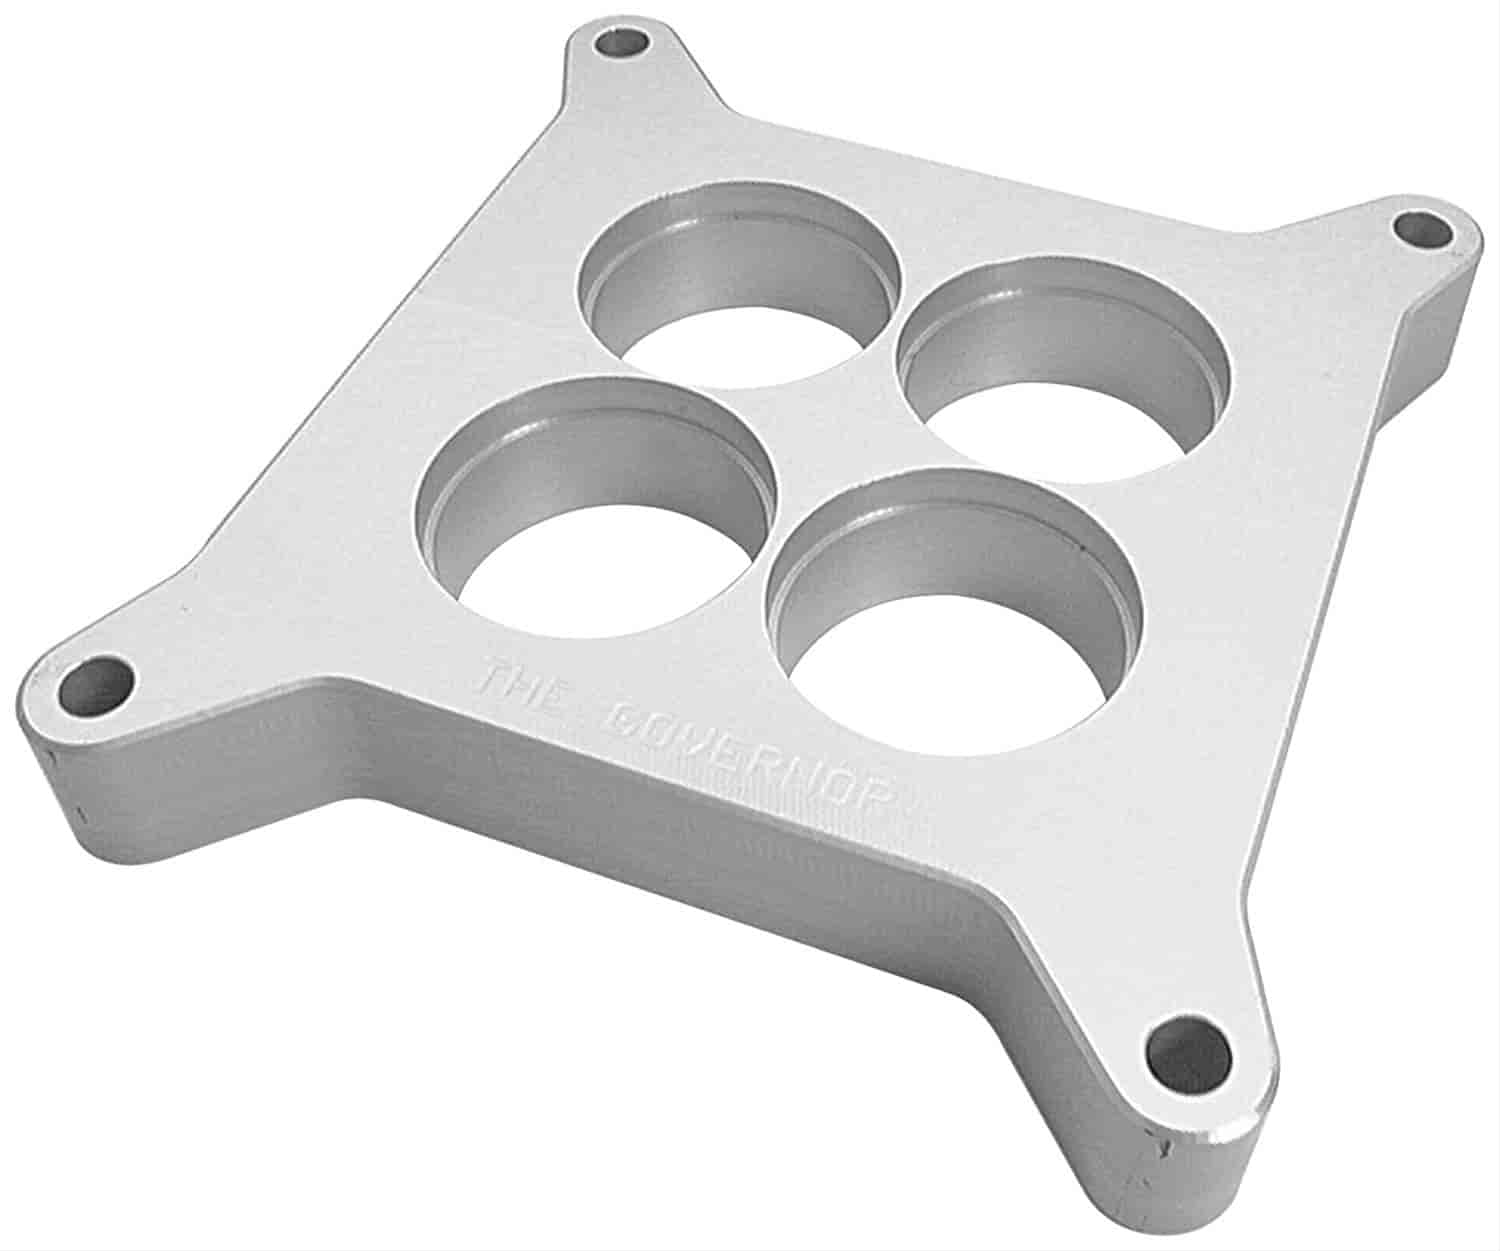 Adjustable Carb Base Plate 4-Hole 4150/4160 Series Holley